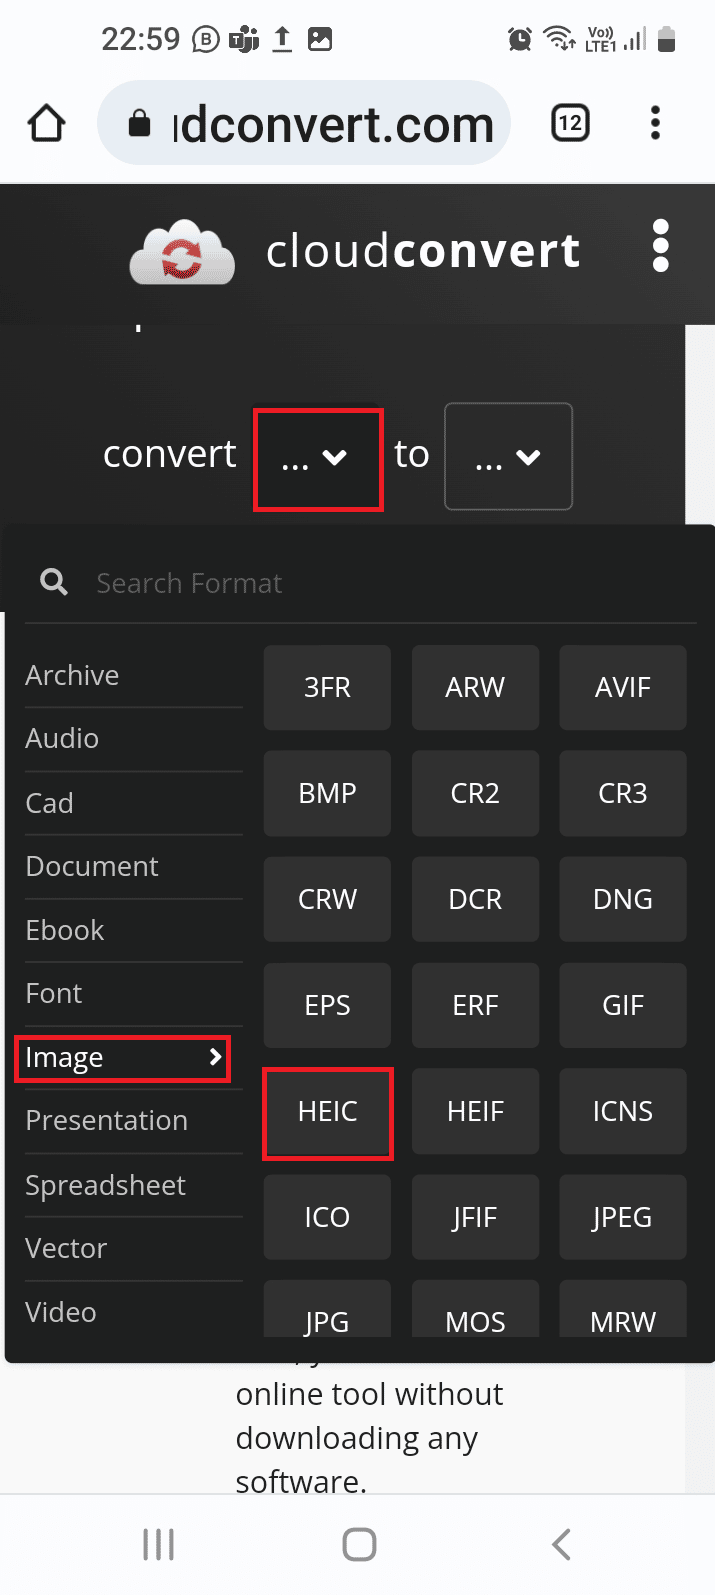 move to the Image tab and tap on the HEIC option